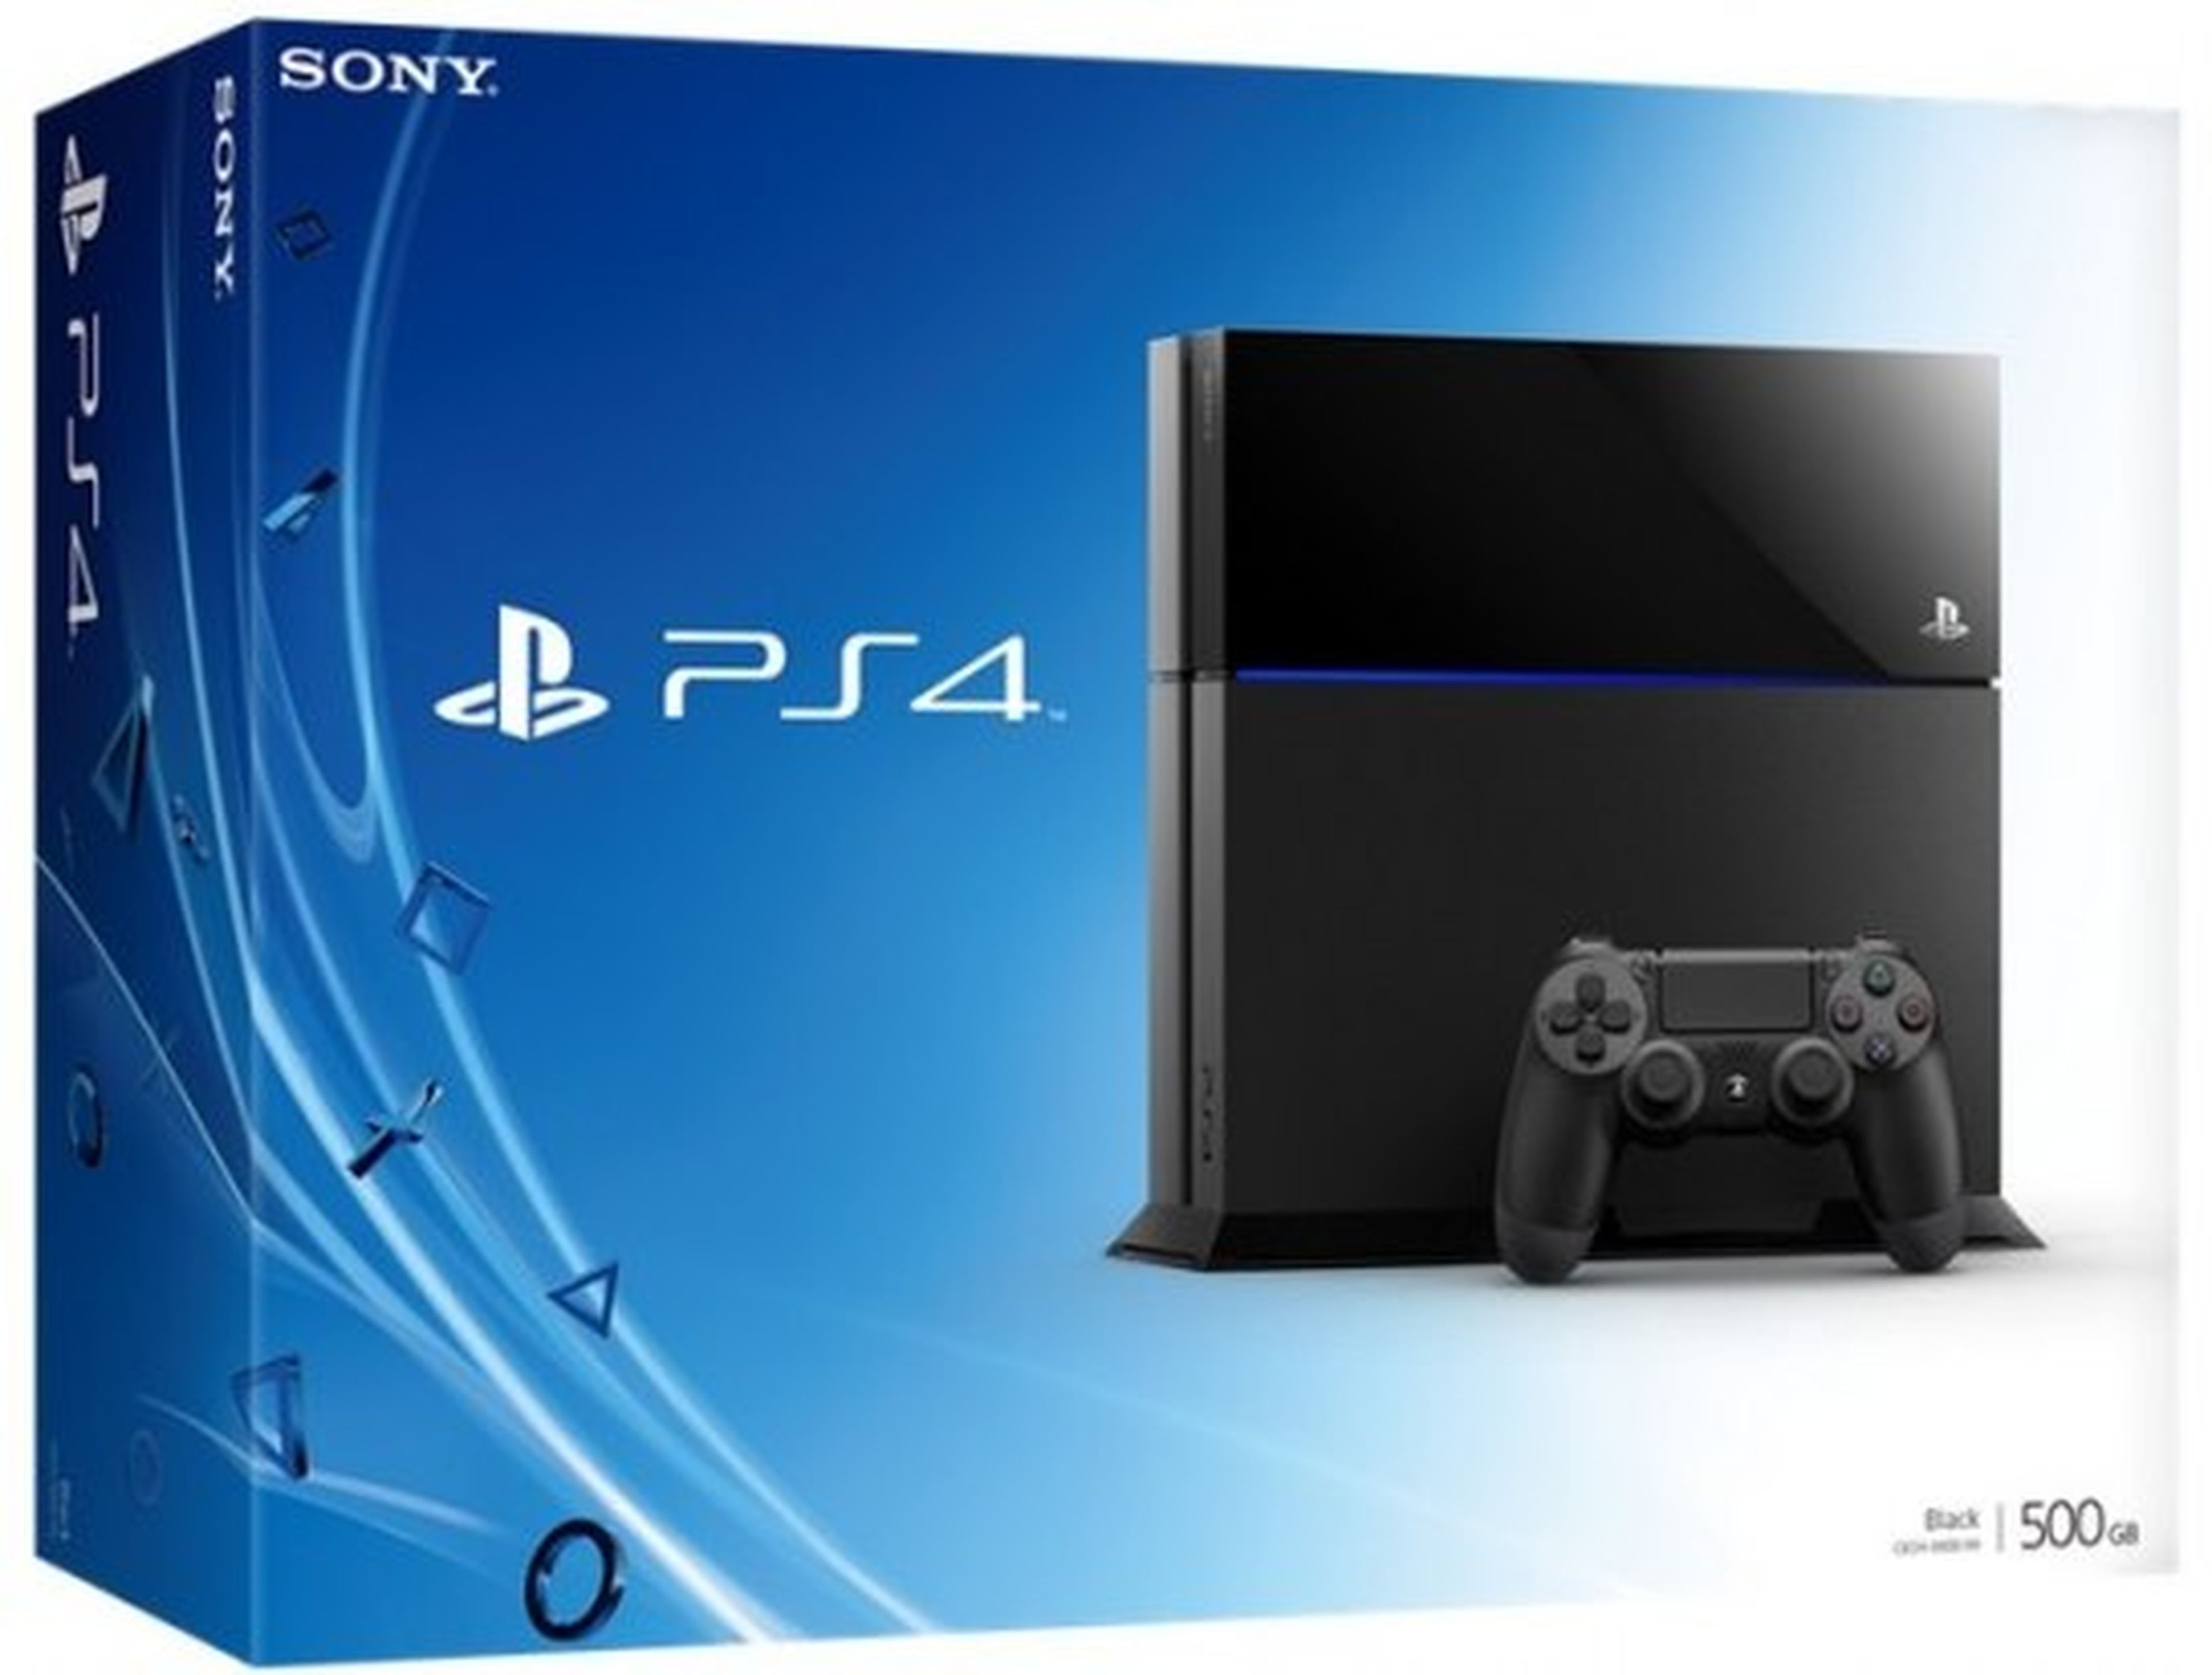 ps4 packaging